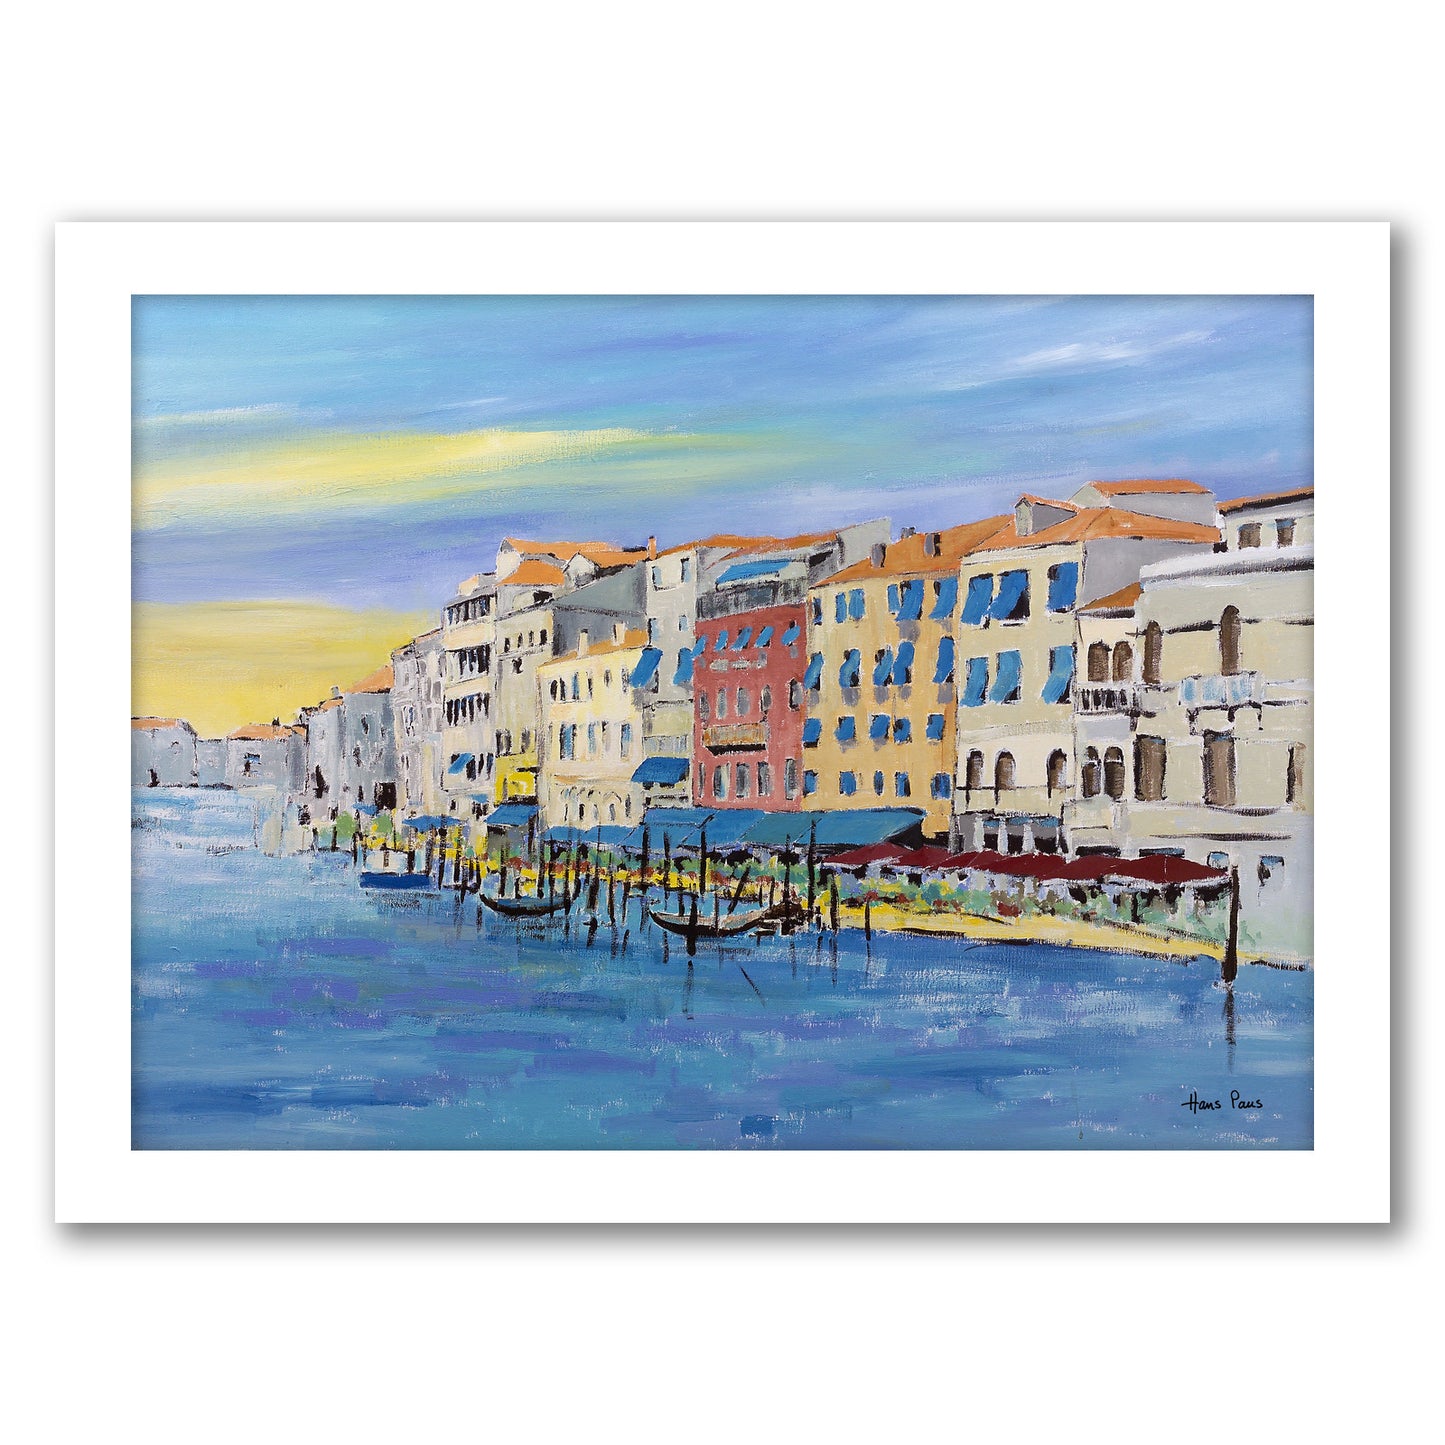 Venice by Anderson Design Group - Framed Print